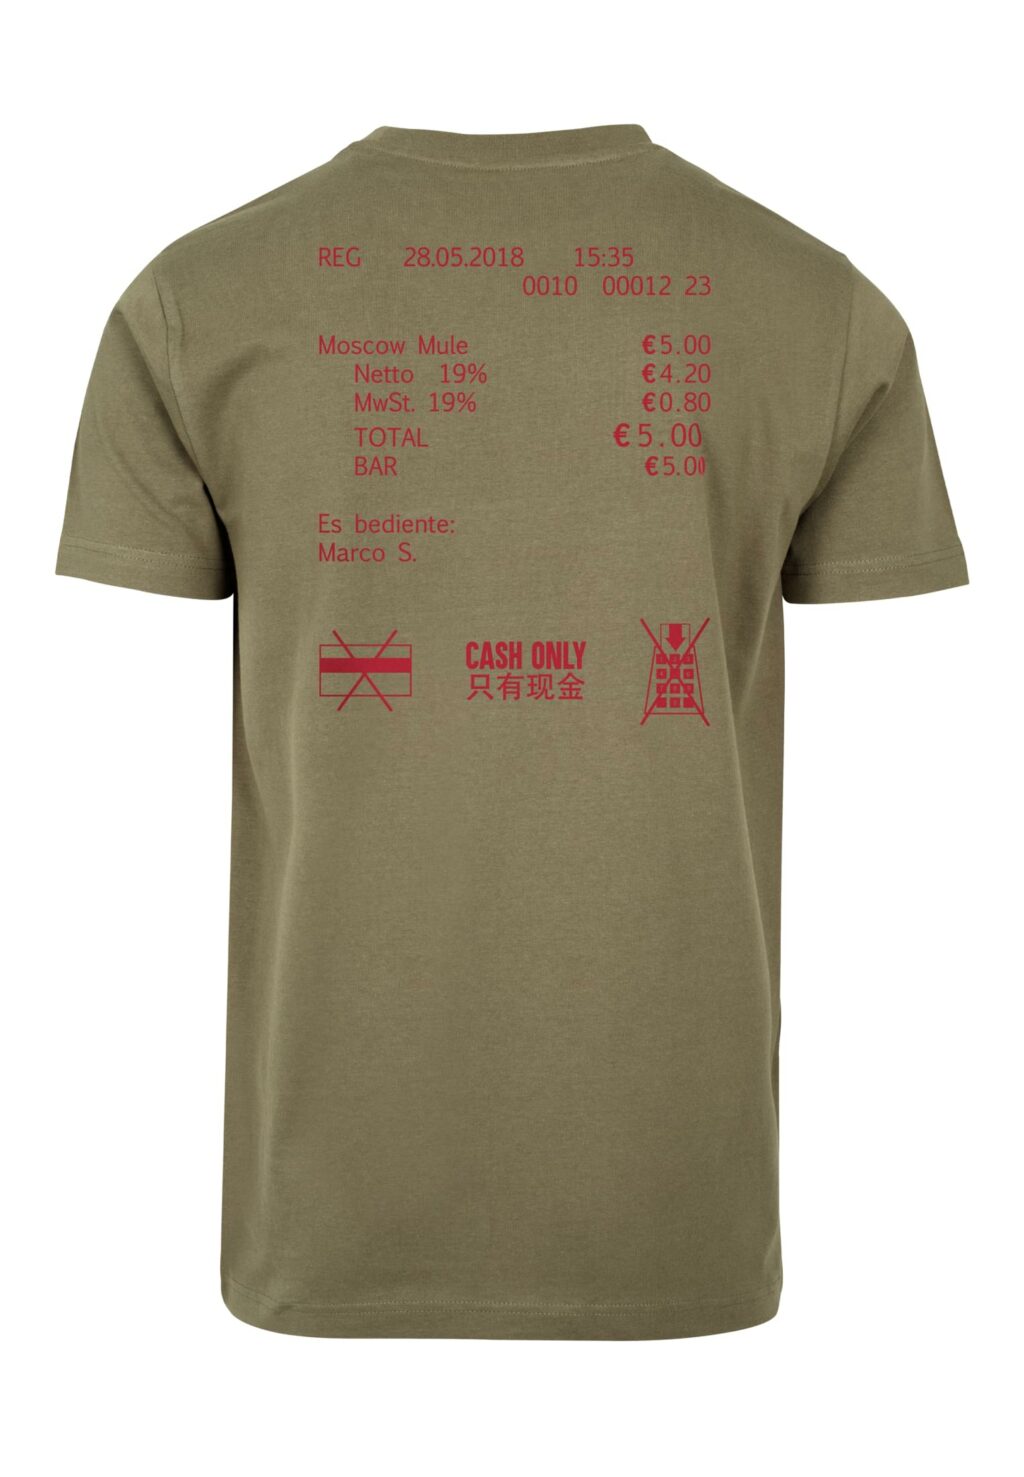 Cash Only Tee olive MT816